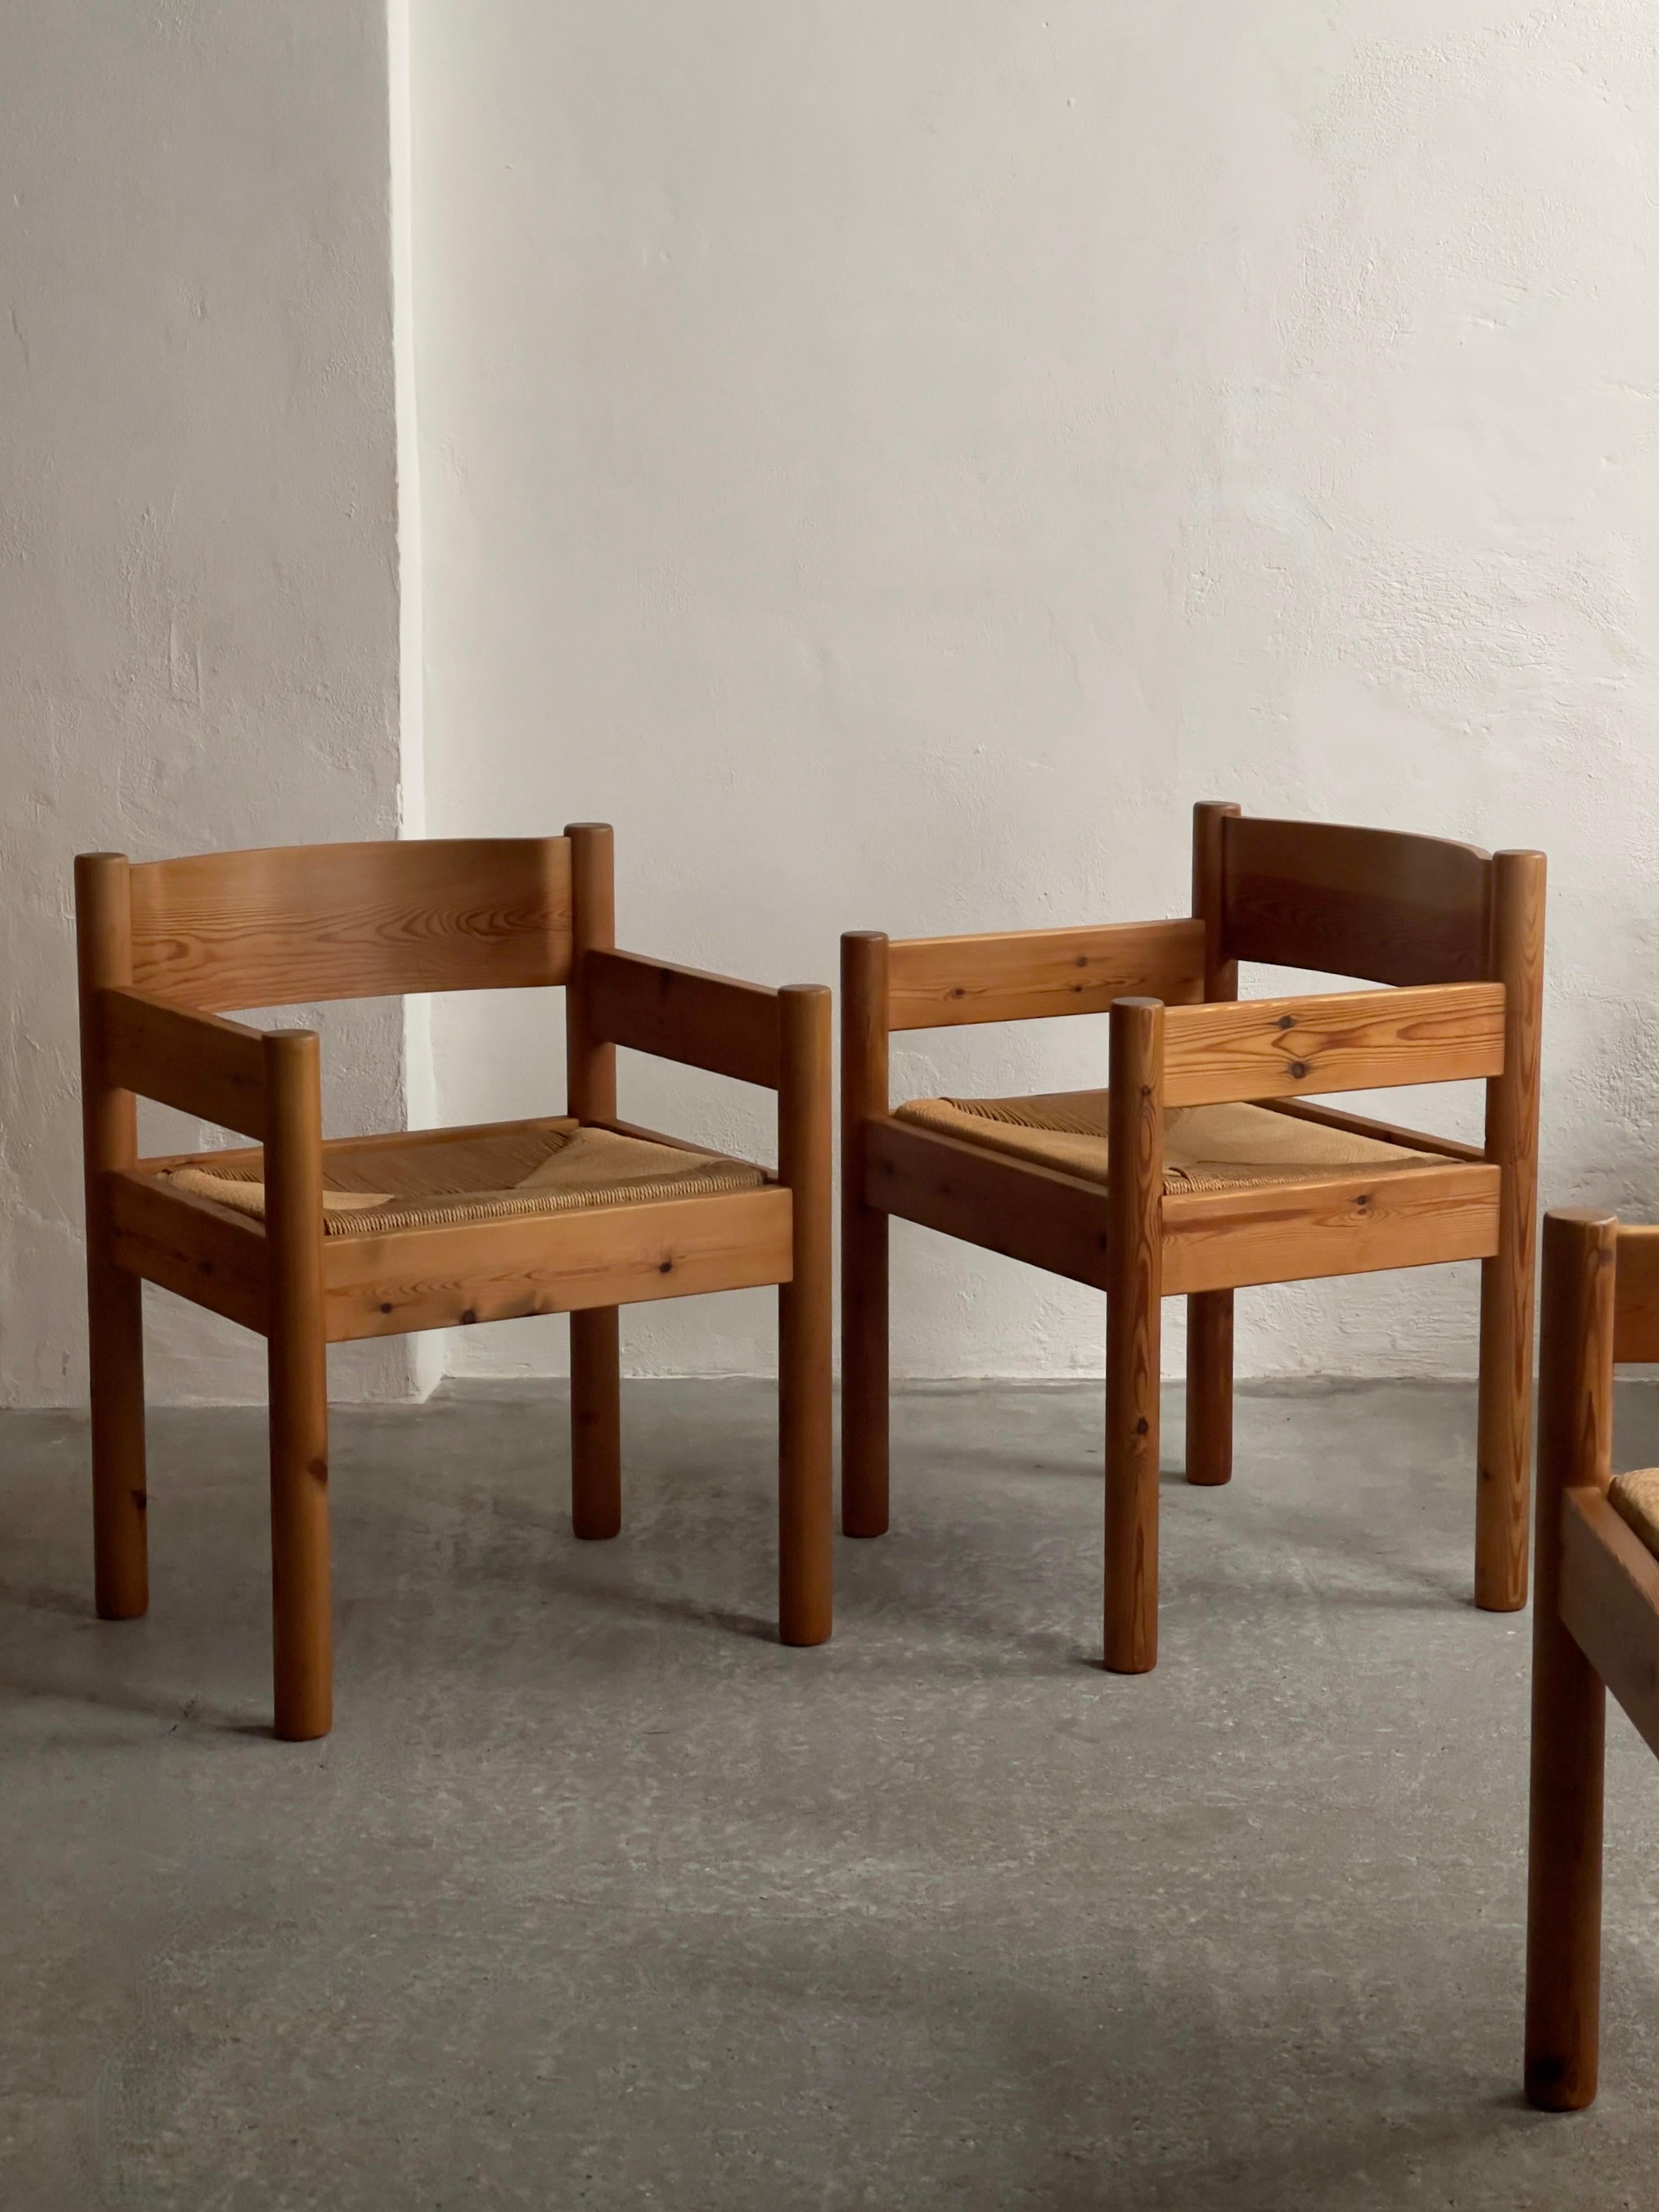 Scandinavian Modern Architects Friis & Moltke dining chairs Denmark 1970, solid pine and paper cord. For Sale